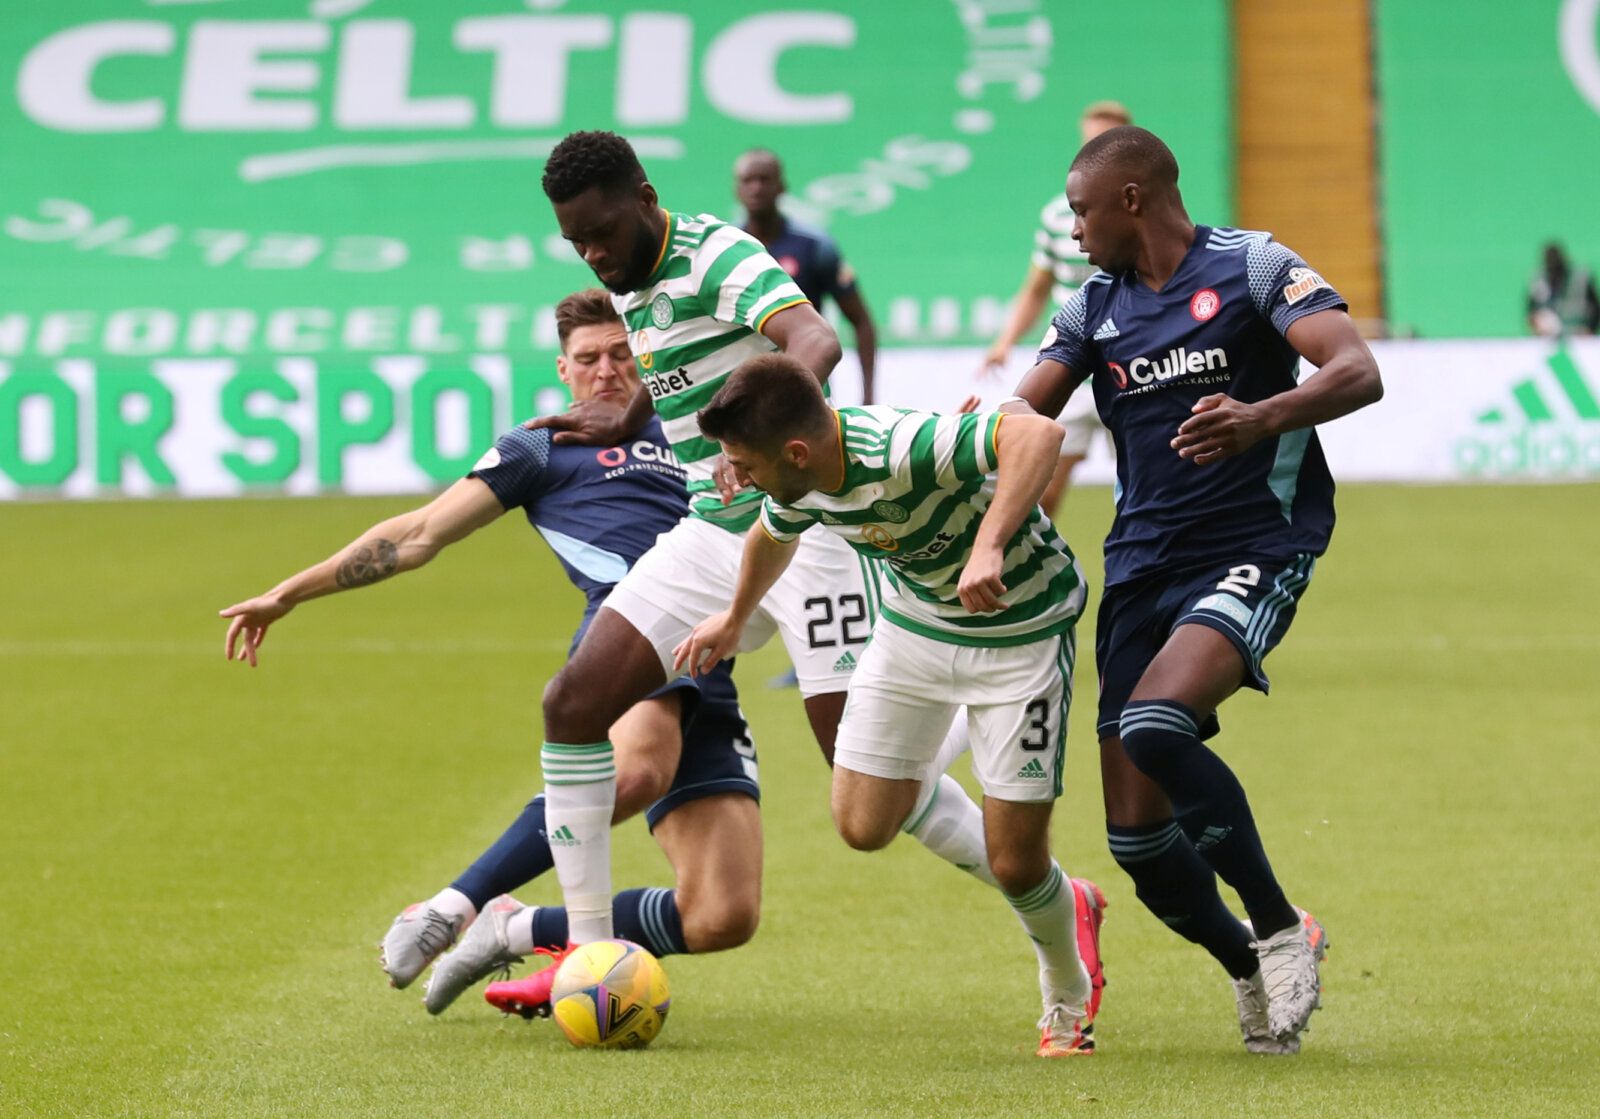 Soccer Football - Scottish Premiership - Celtic v Hamilton - Celtic Park, Glasgow, Scotland, Britain - August 2, 2020   Celtic's Odsonne Edouard in action with Hamilton's Hakeem Odoffin, as play resumes behind closed doors following the outbreak of the coronavirus disease (COVID-19)   Pool via REUTERS/Ian MacNicol